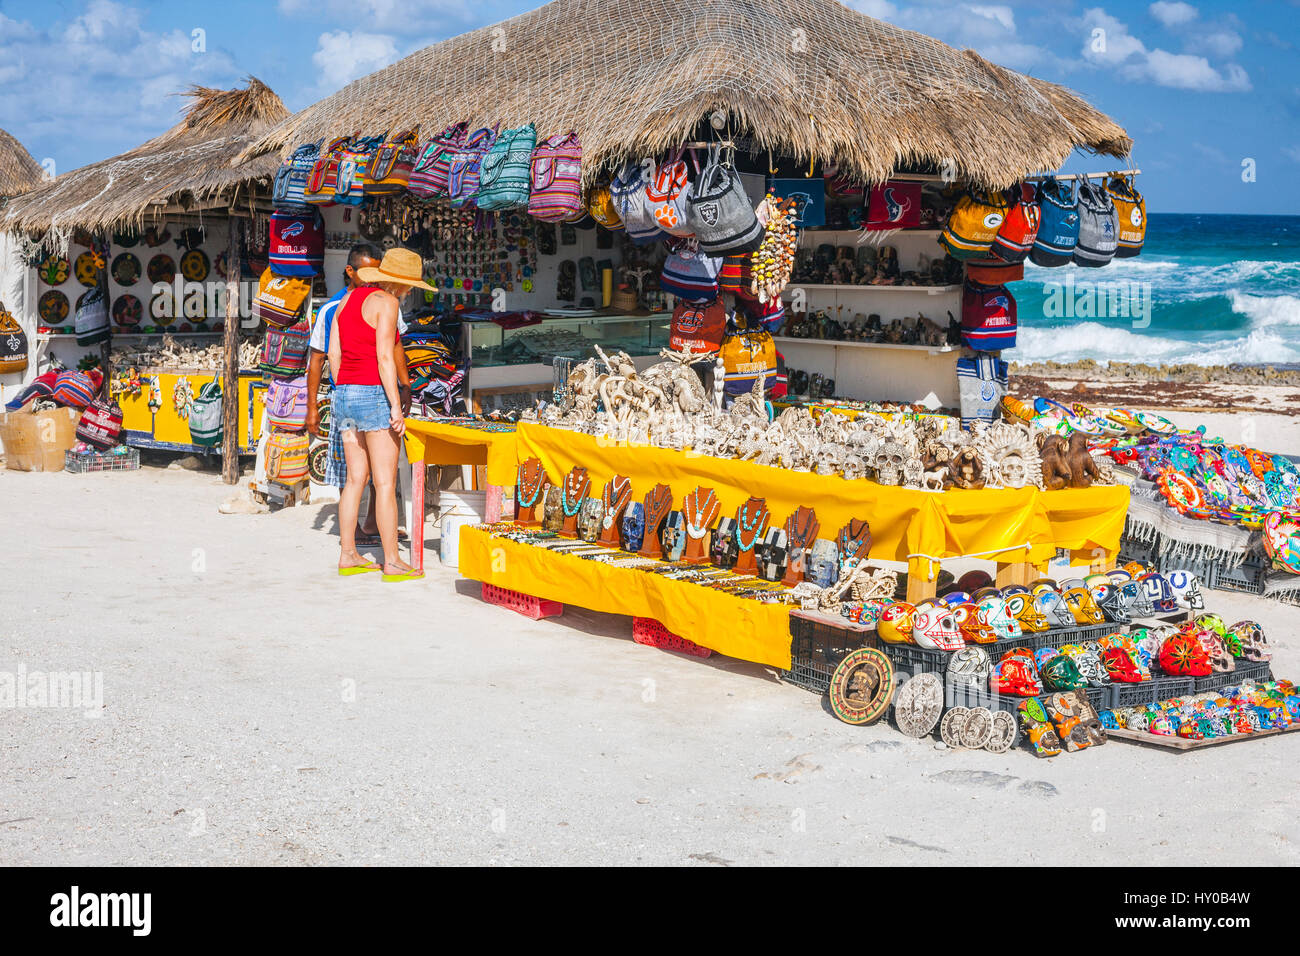 Souvenir shop beside the road on Cozumel island in Mexico Stock Photo